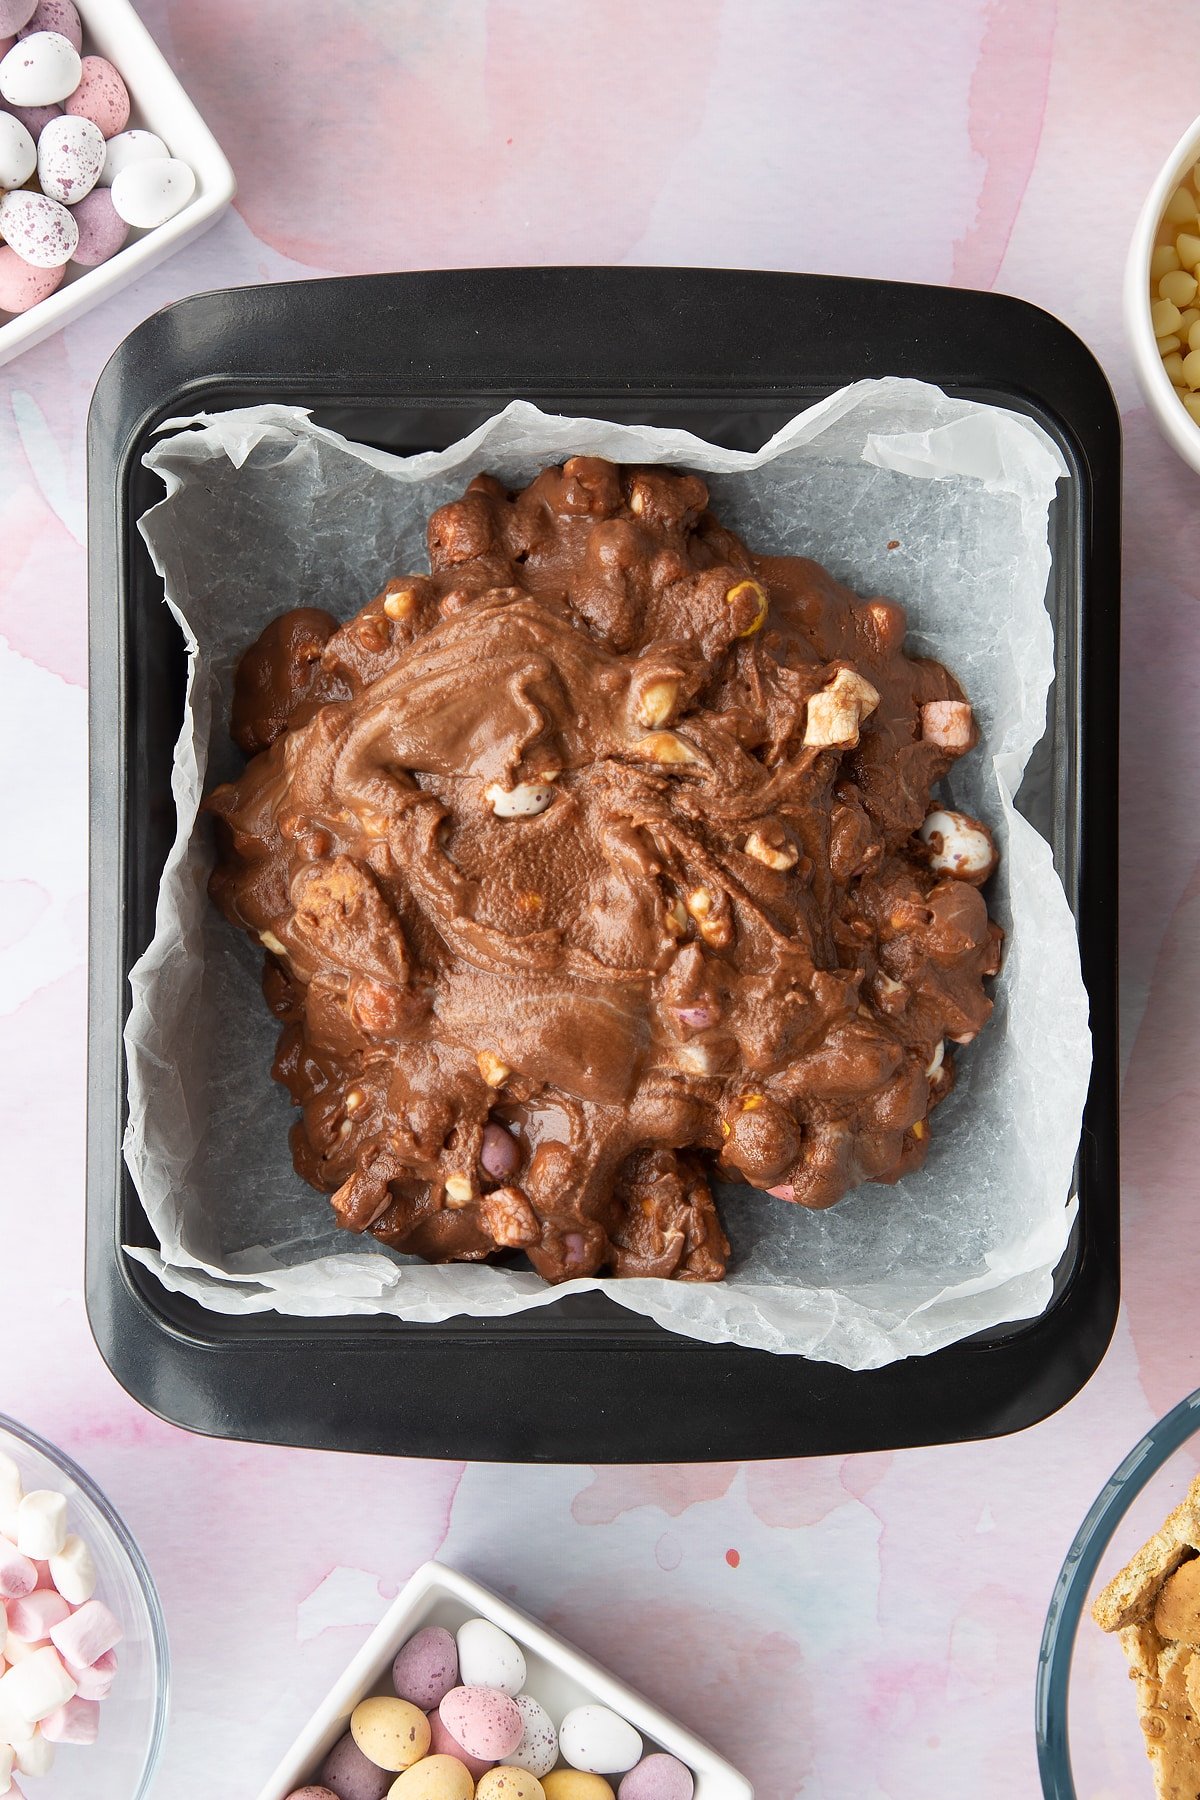 Rocky road mix in a tray lined with baking paper. Ingredients to make Mini Egg rocky road surrounds the tray.